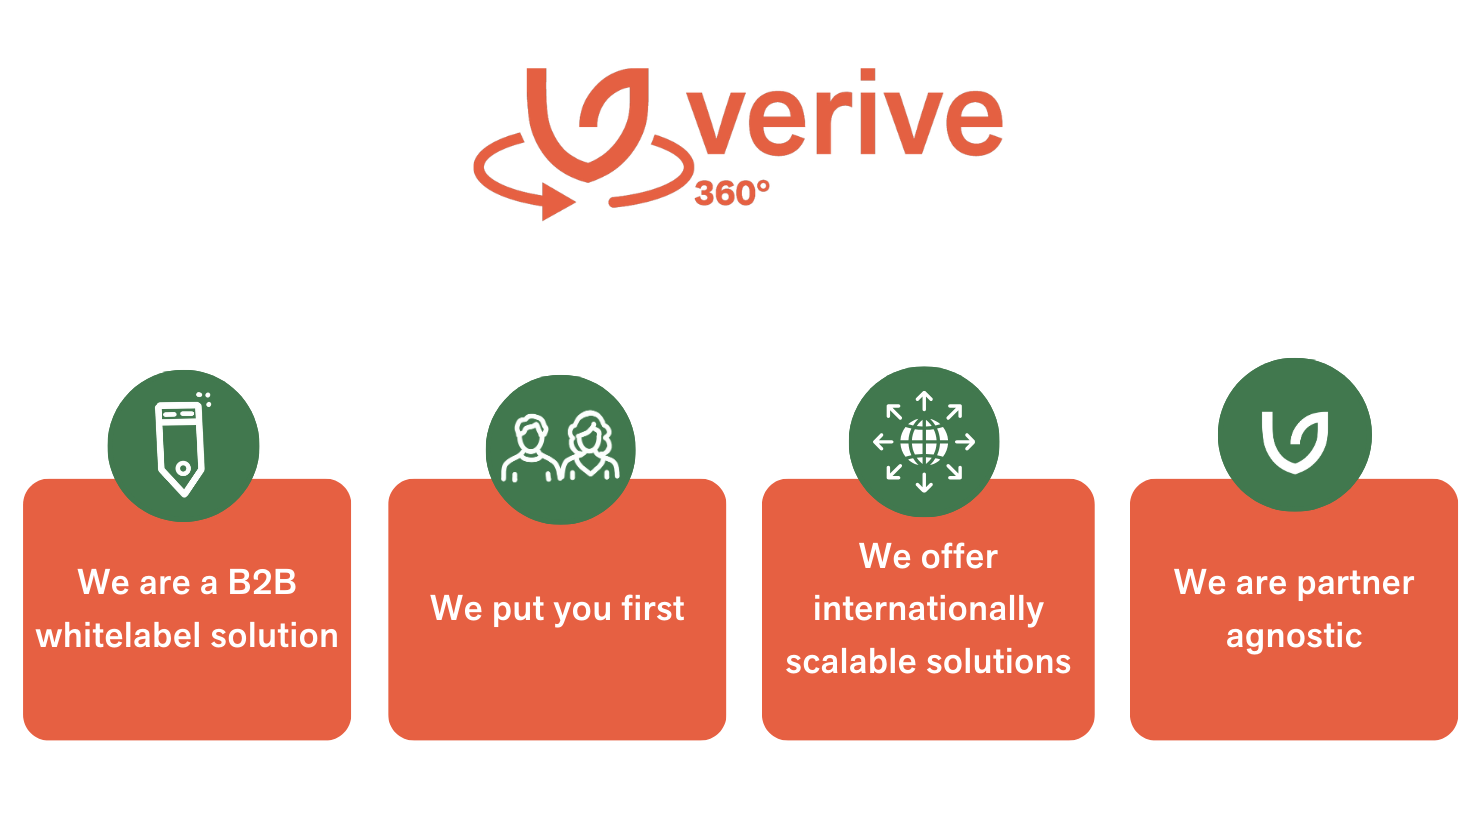 Verive 360: our strengths 